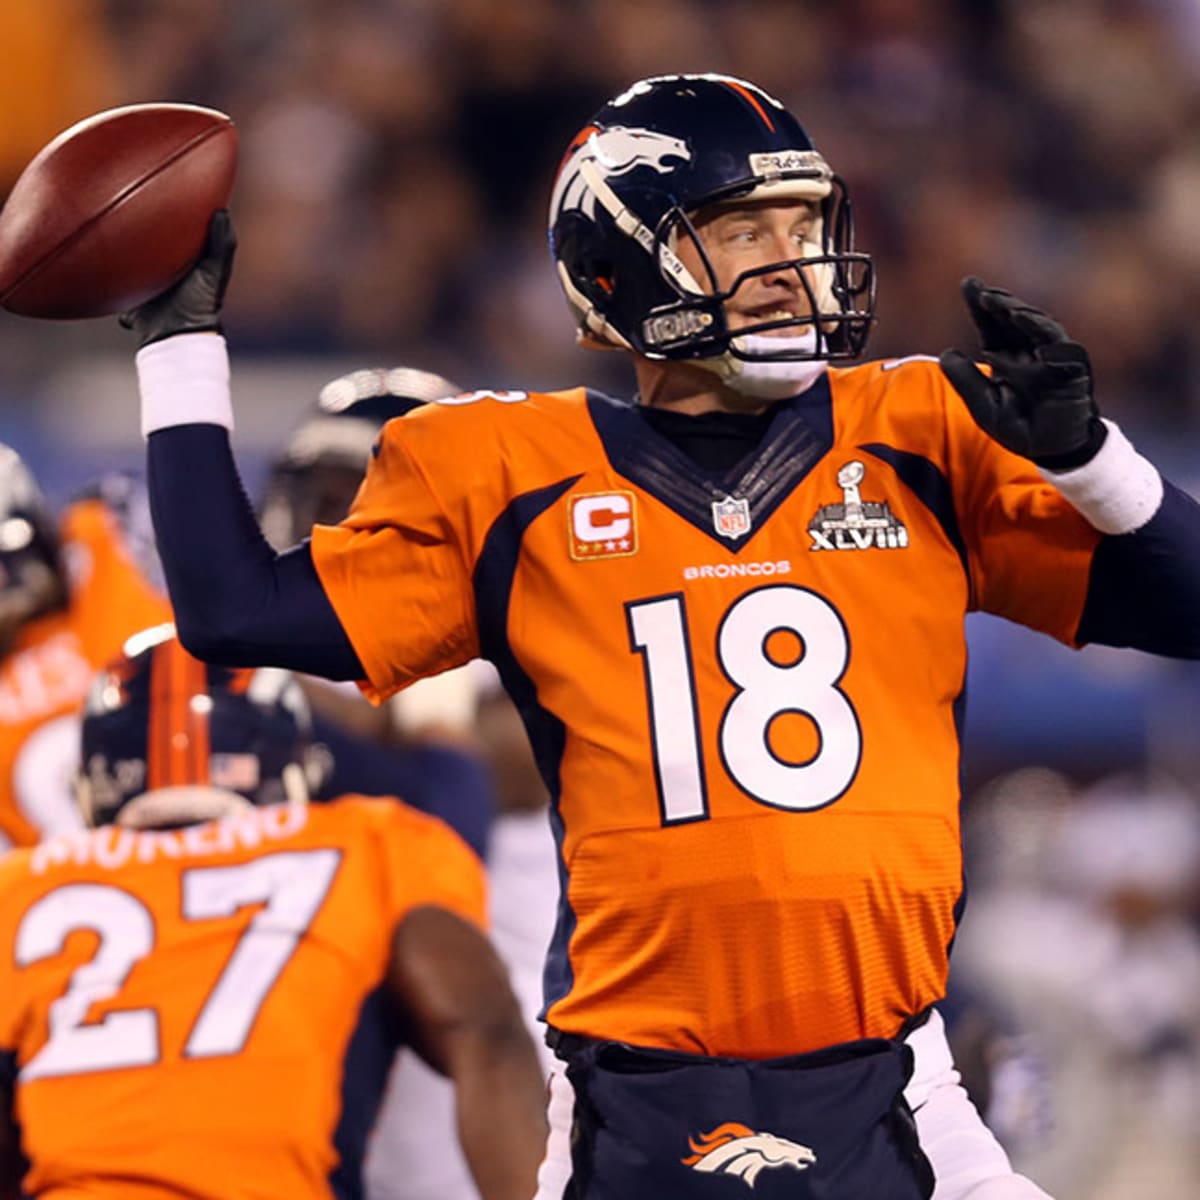 Peyton Manning has checkered record in Super Bowl 